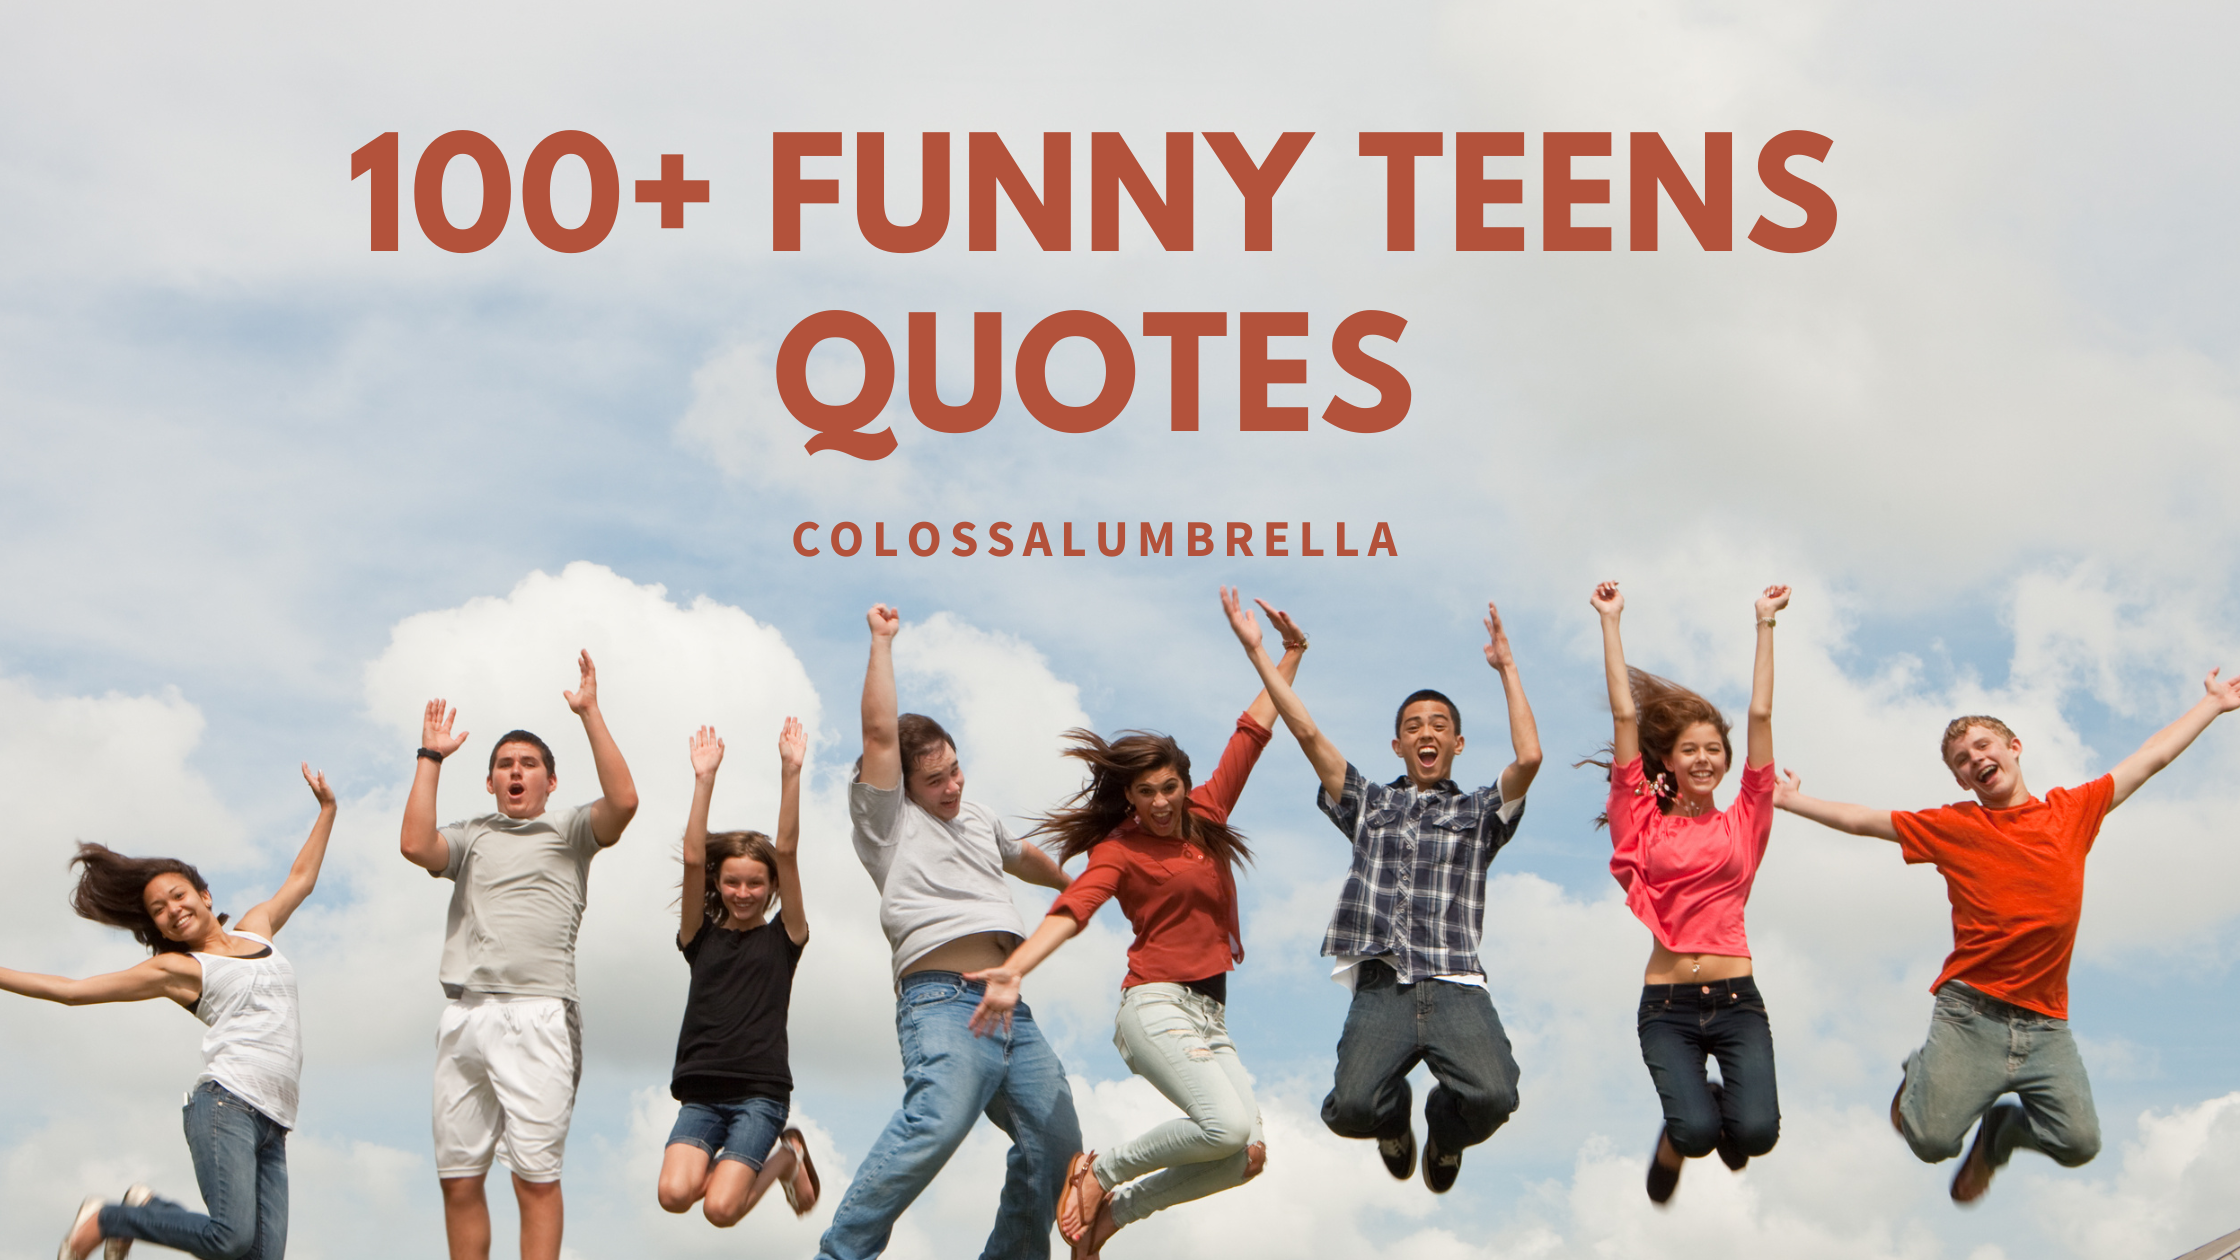 100+ Funny teens quotes – Laugh Out Loud